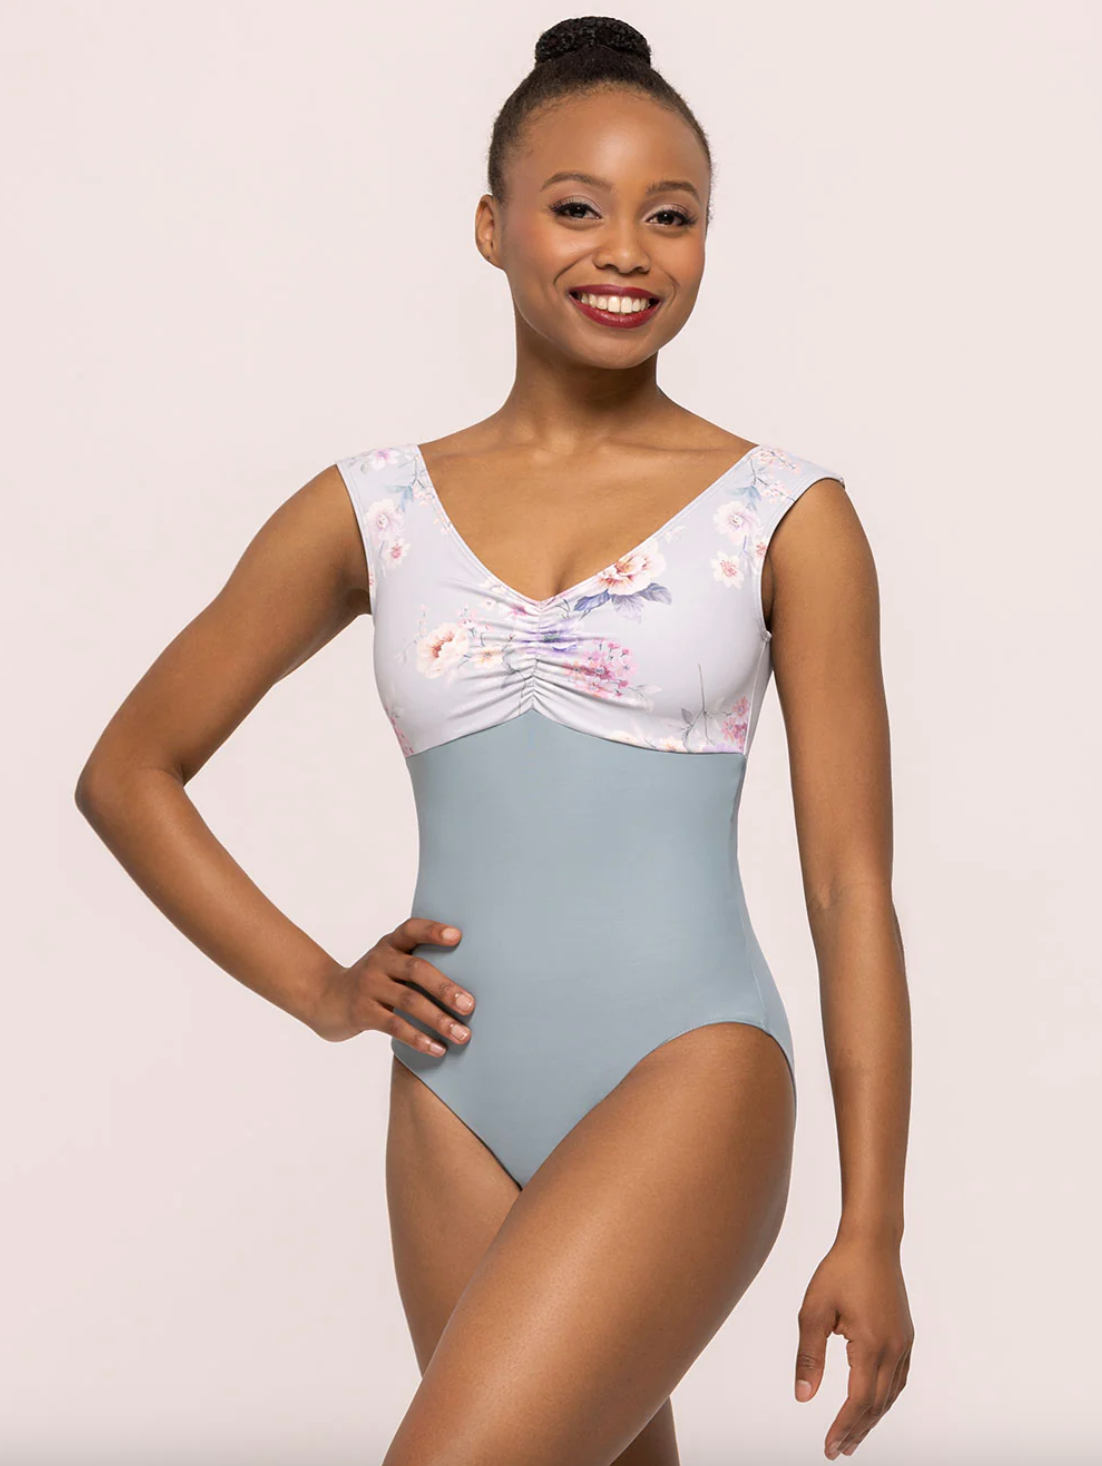 Sophia Tank Leotard with Pinch Front in Just Friends Powder Blue